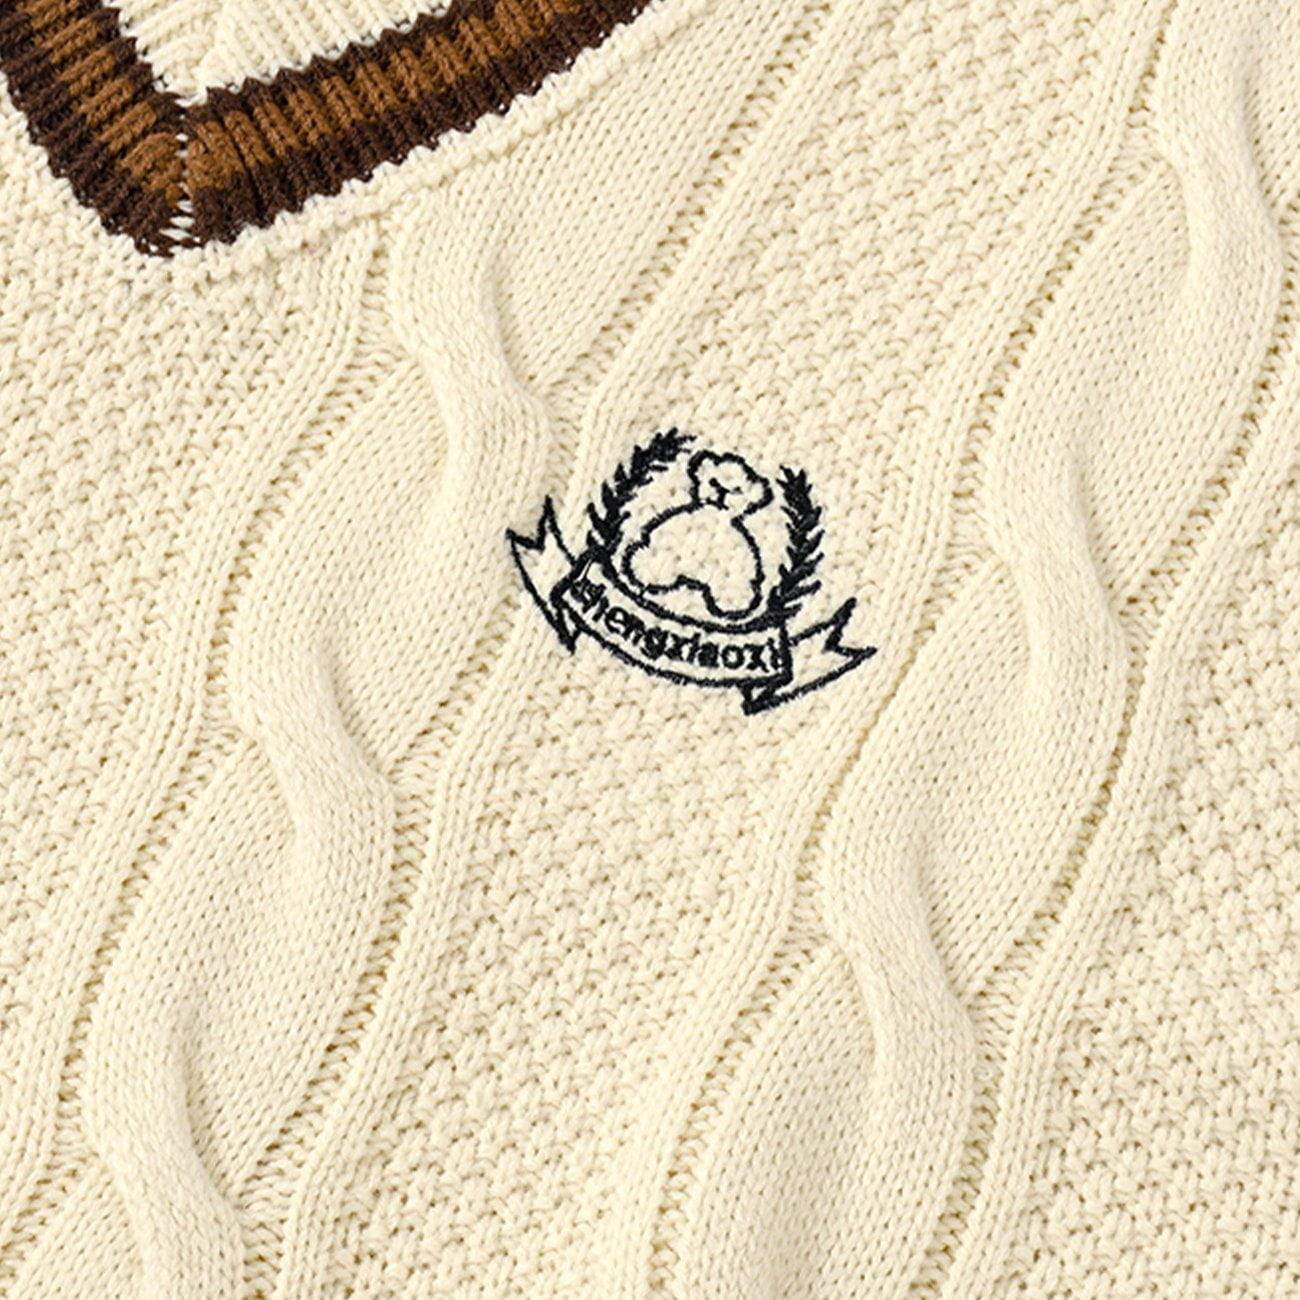 JUSTNOTAG Retro Campus Style Knitted Sweater Vest